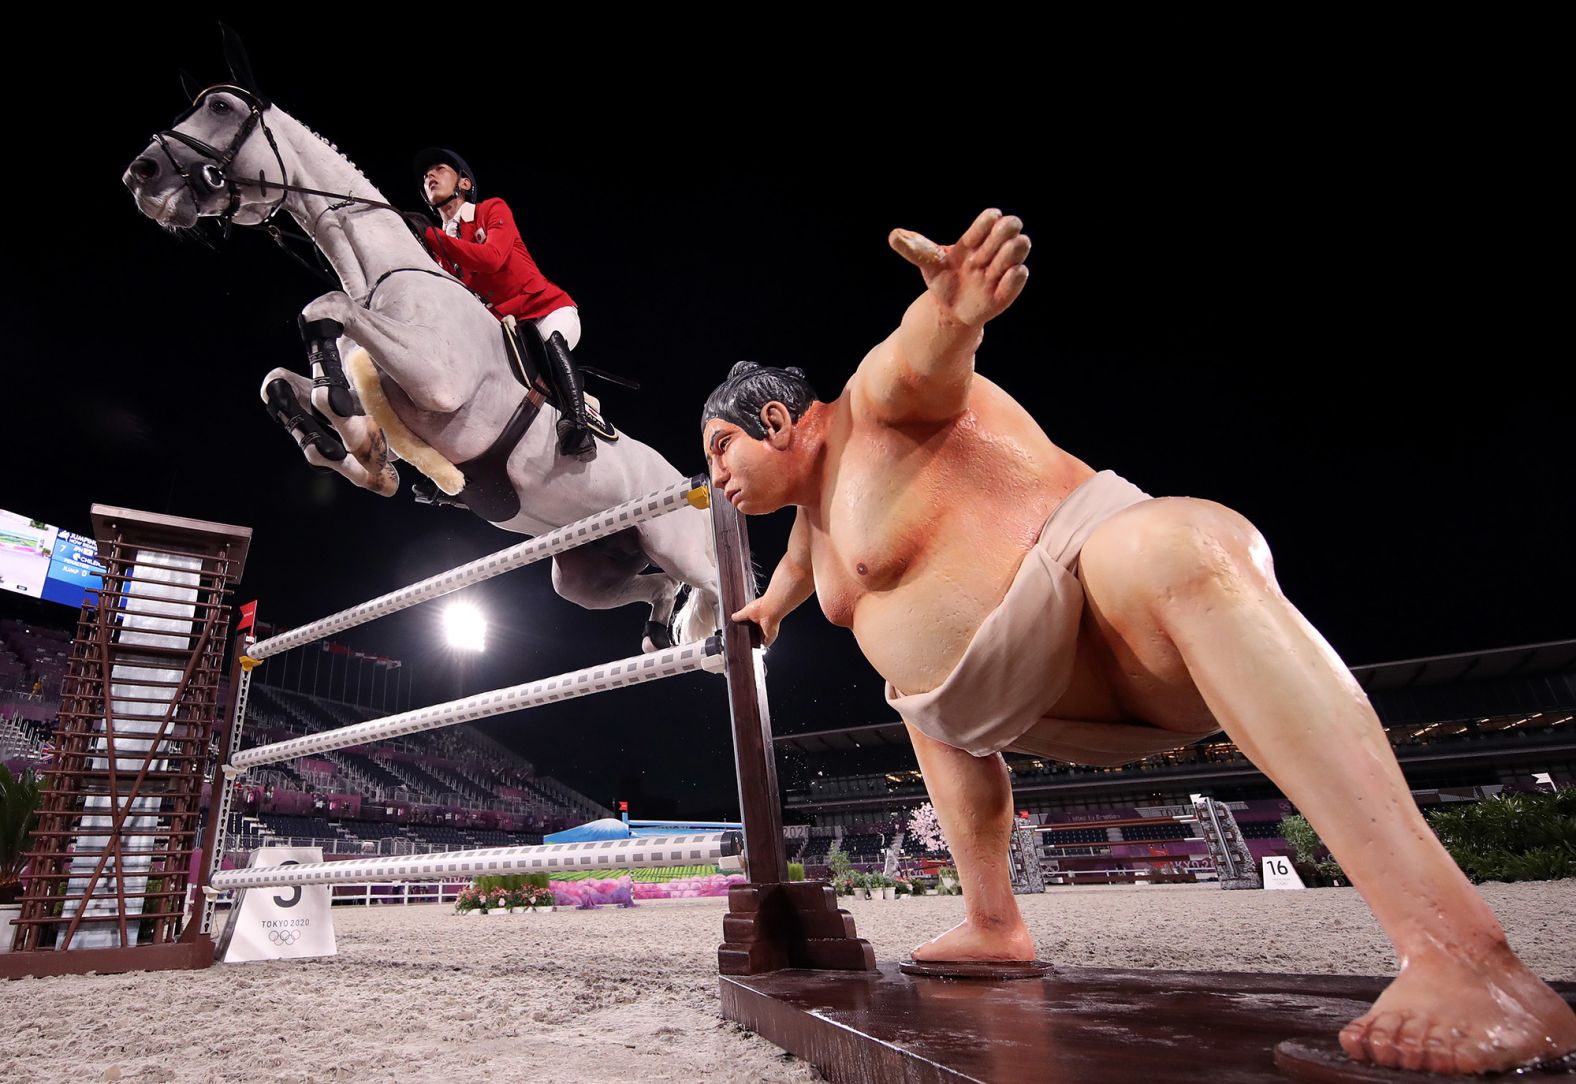 A statue of a sumo wrestler is seen near an obstacle as Japan's Koki Saito, aboard Chilensky, competes in jumping qualifiers on August 4. Riders said the lifelike statue <a href="index.php?page=&url=https%3A%2F%2Fapnews.com%2Farticle%2F2020-tokyo-olympics-equestrian-sumo-sculpture-8c9a3588952acf9502221636a5bf29d5" target="_blank" target="_blank">might have distracted some horses</a> during the competition.